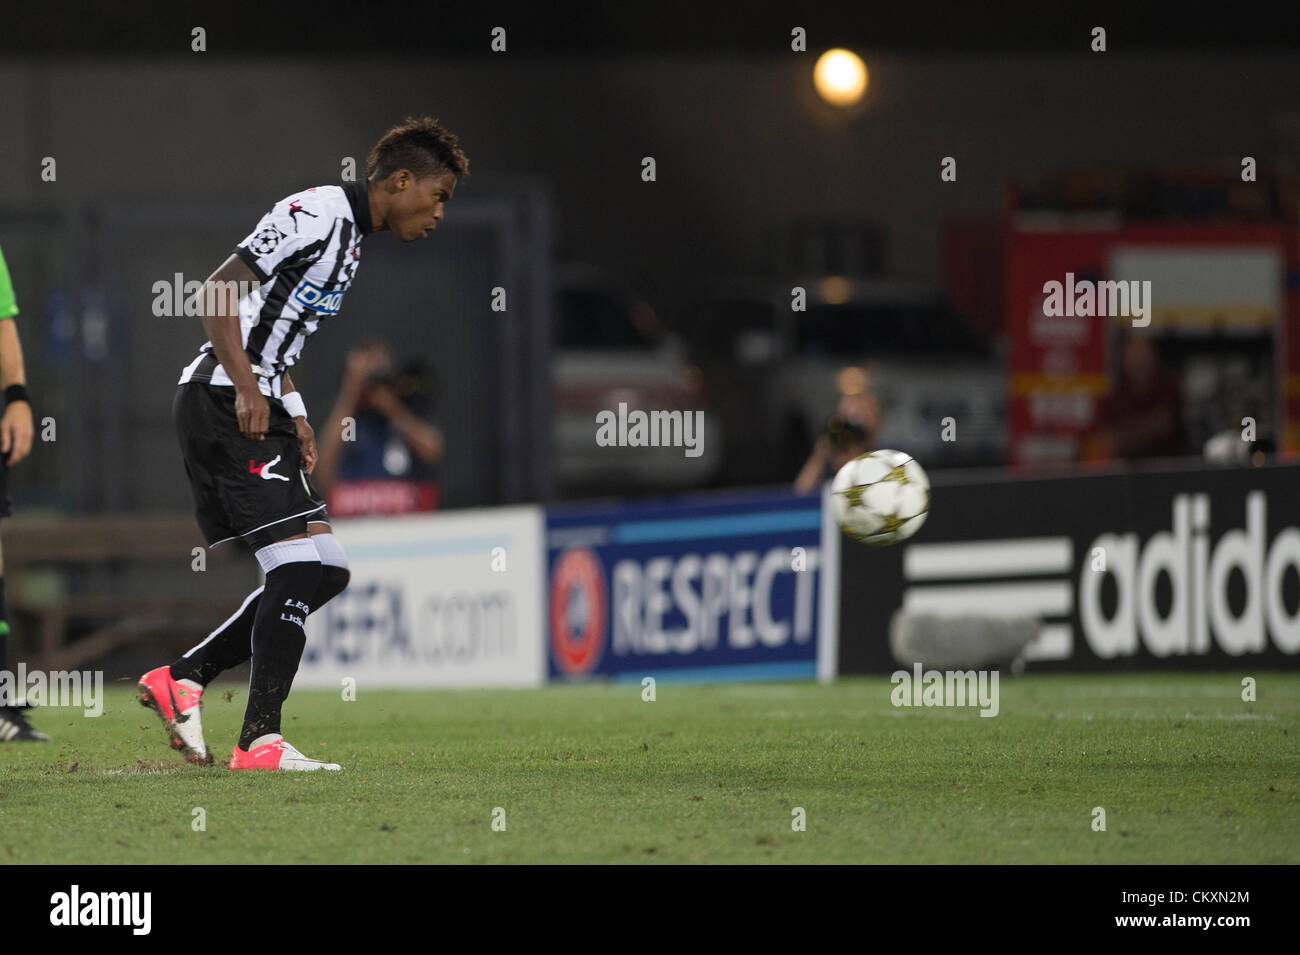 Udine, Italy. 28th Aug 2012. Maicosuel (Udinese), AUGUST 28, 2012 - Football / Soccer : Maicosuel of Udinese misses his penalty in the penalty shoot-out during the UEFA Champions League Play-off 2nd leg match between Udinese 1(4-5)1 Sporting Braga at Stadio Friuli in Udine, Italy. (Photo by Maurizio Borsari/AFLO) Stock Photo